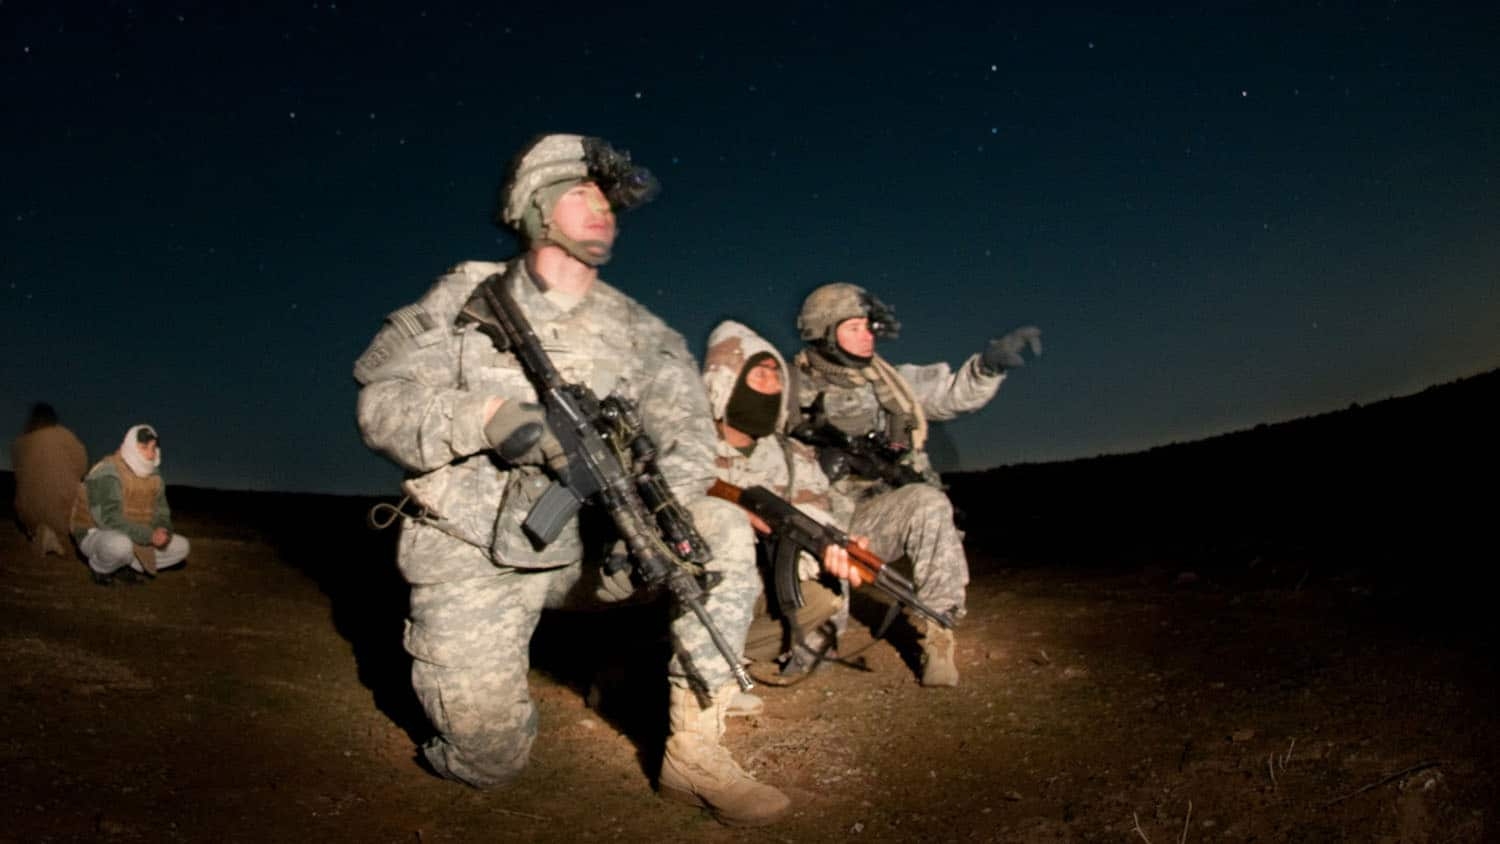 at night in the desert, a soldier with a rifle kneels in the foreground, while two other soldiers converse behind him